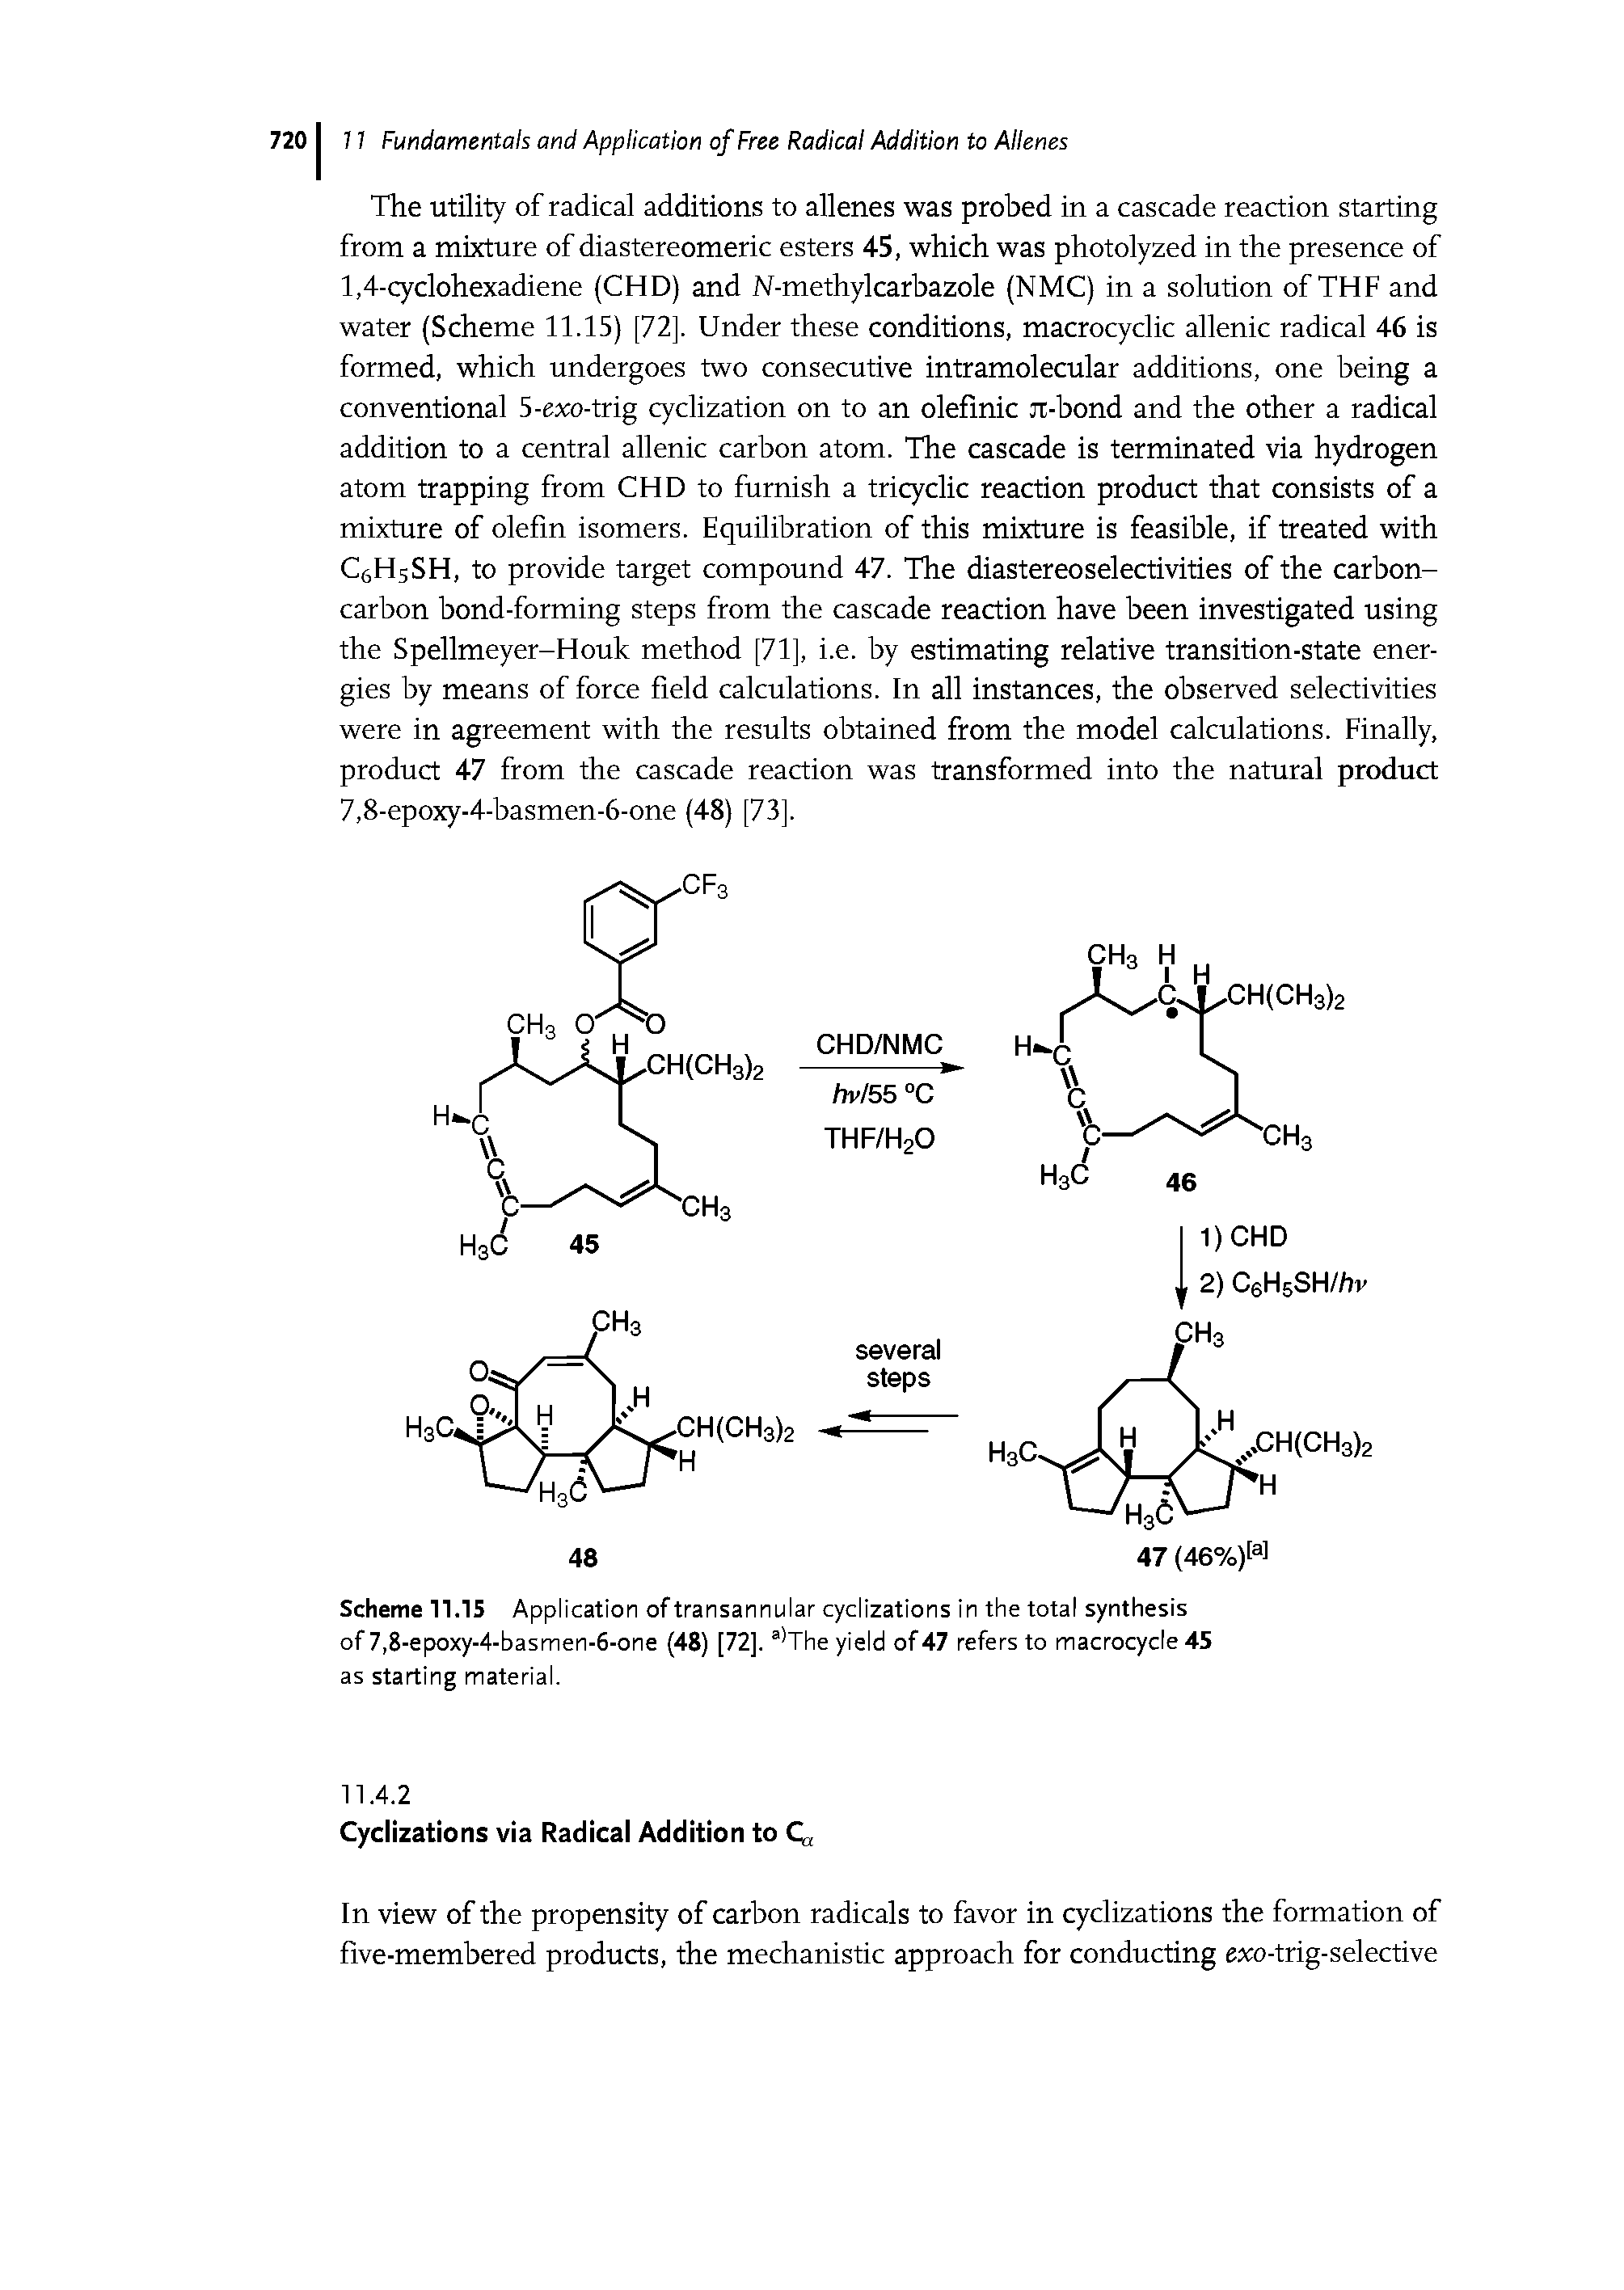 Scheme 11.IS Application of transannular cyclizations in the total synthesis of 7,8-epoxy-4-basmen-6-one (48) [72]. a)The yield of 47 refers to macrocycle 45 as starting material.